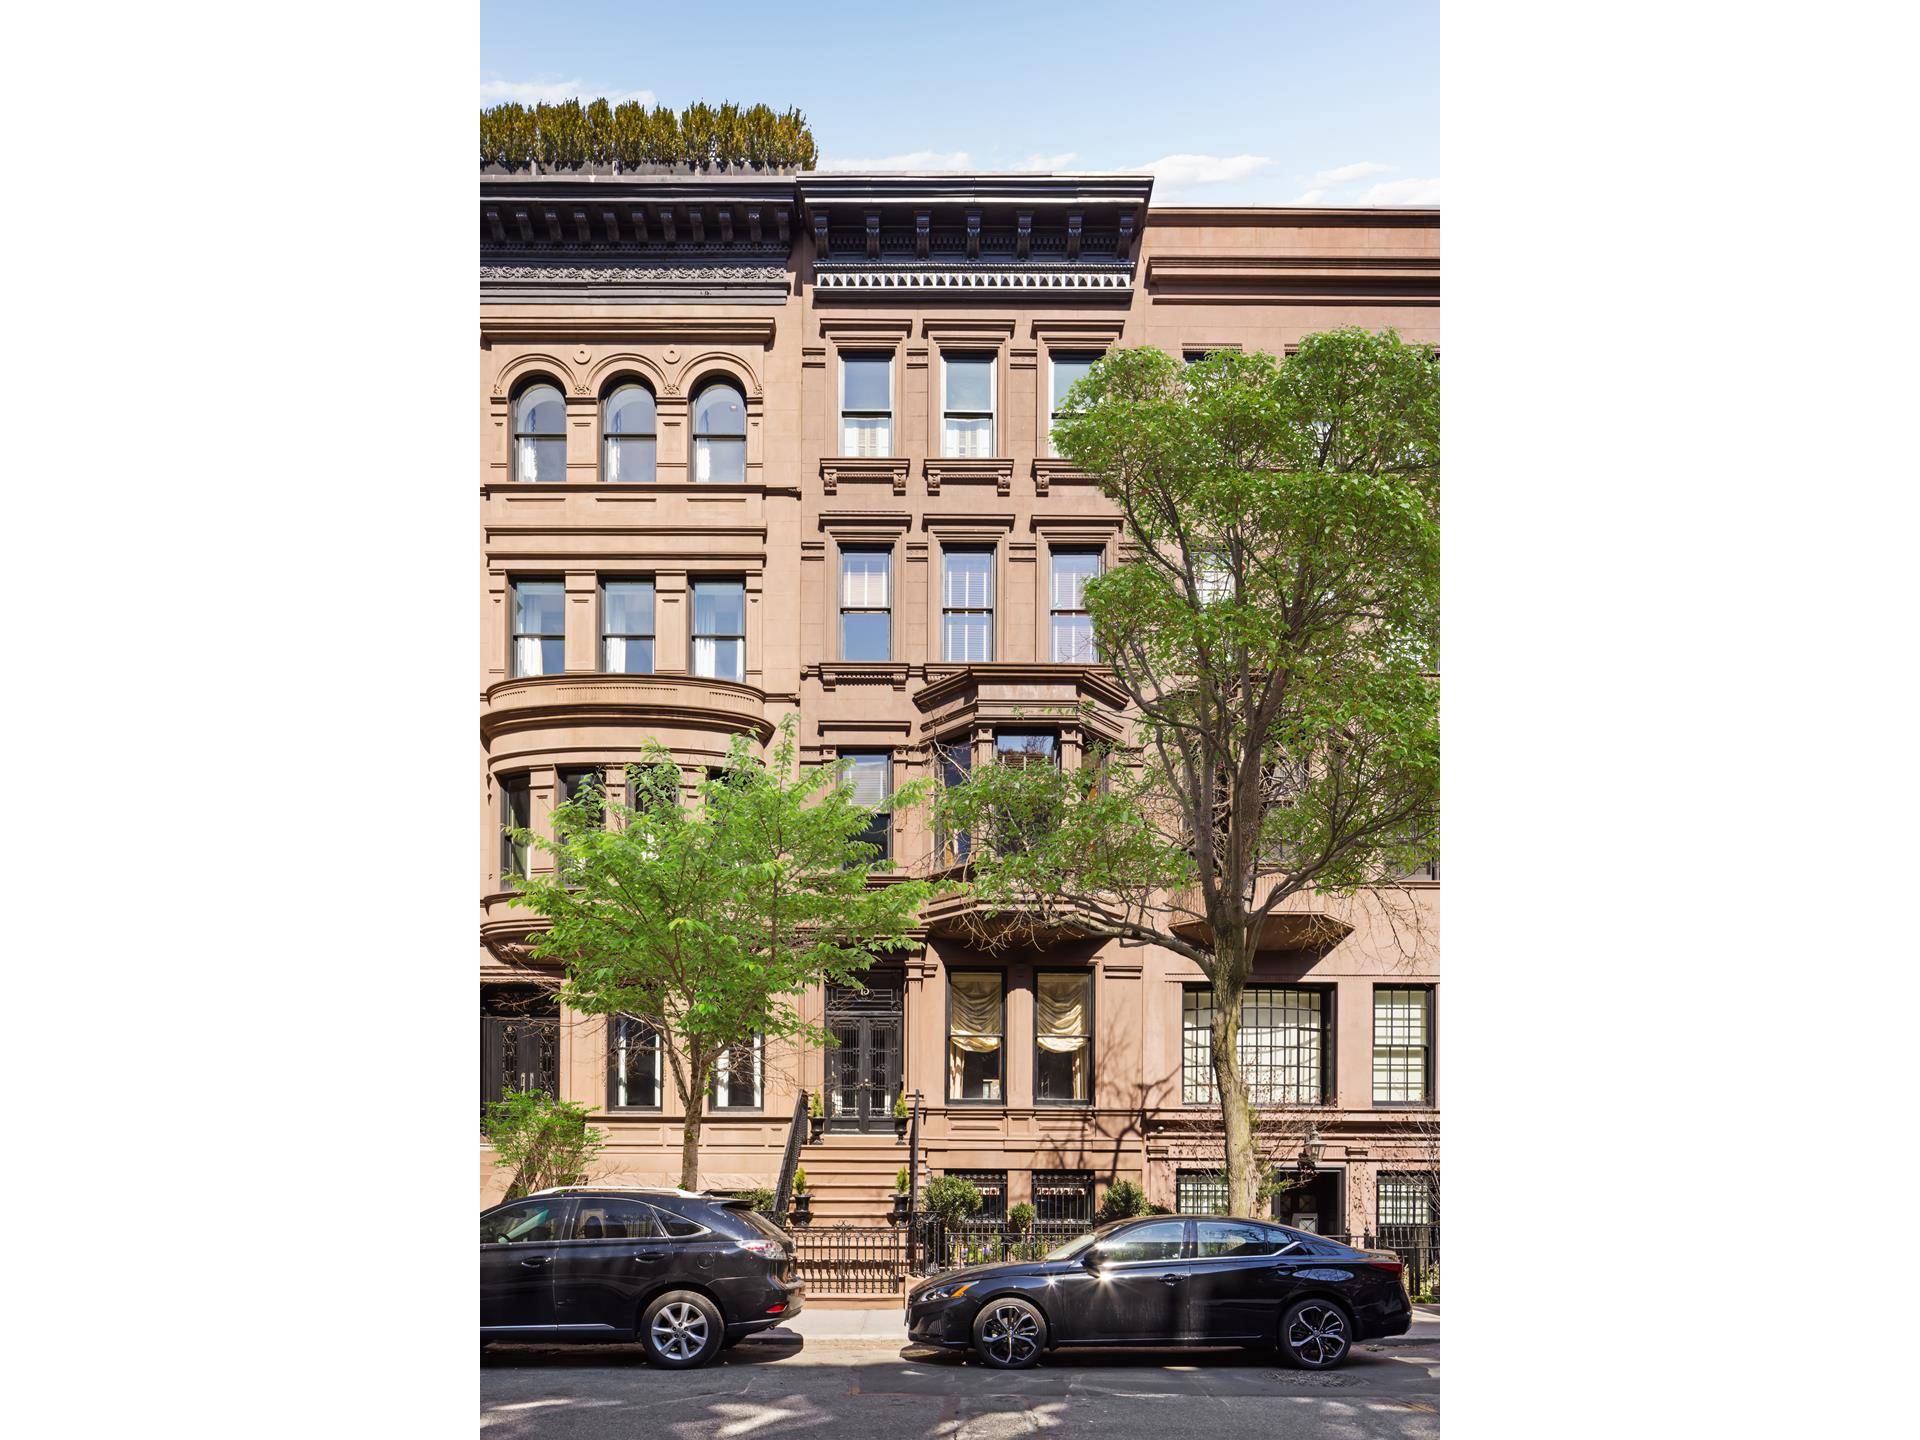 Introducing 15 East 93, a 20' wide tastefully appointed Renaissance Revivaltownhouse.